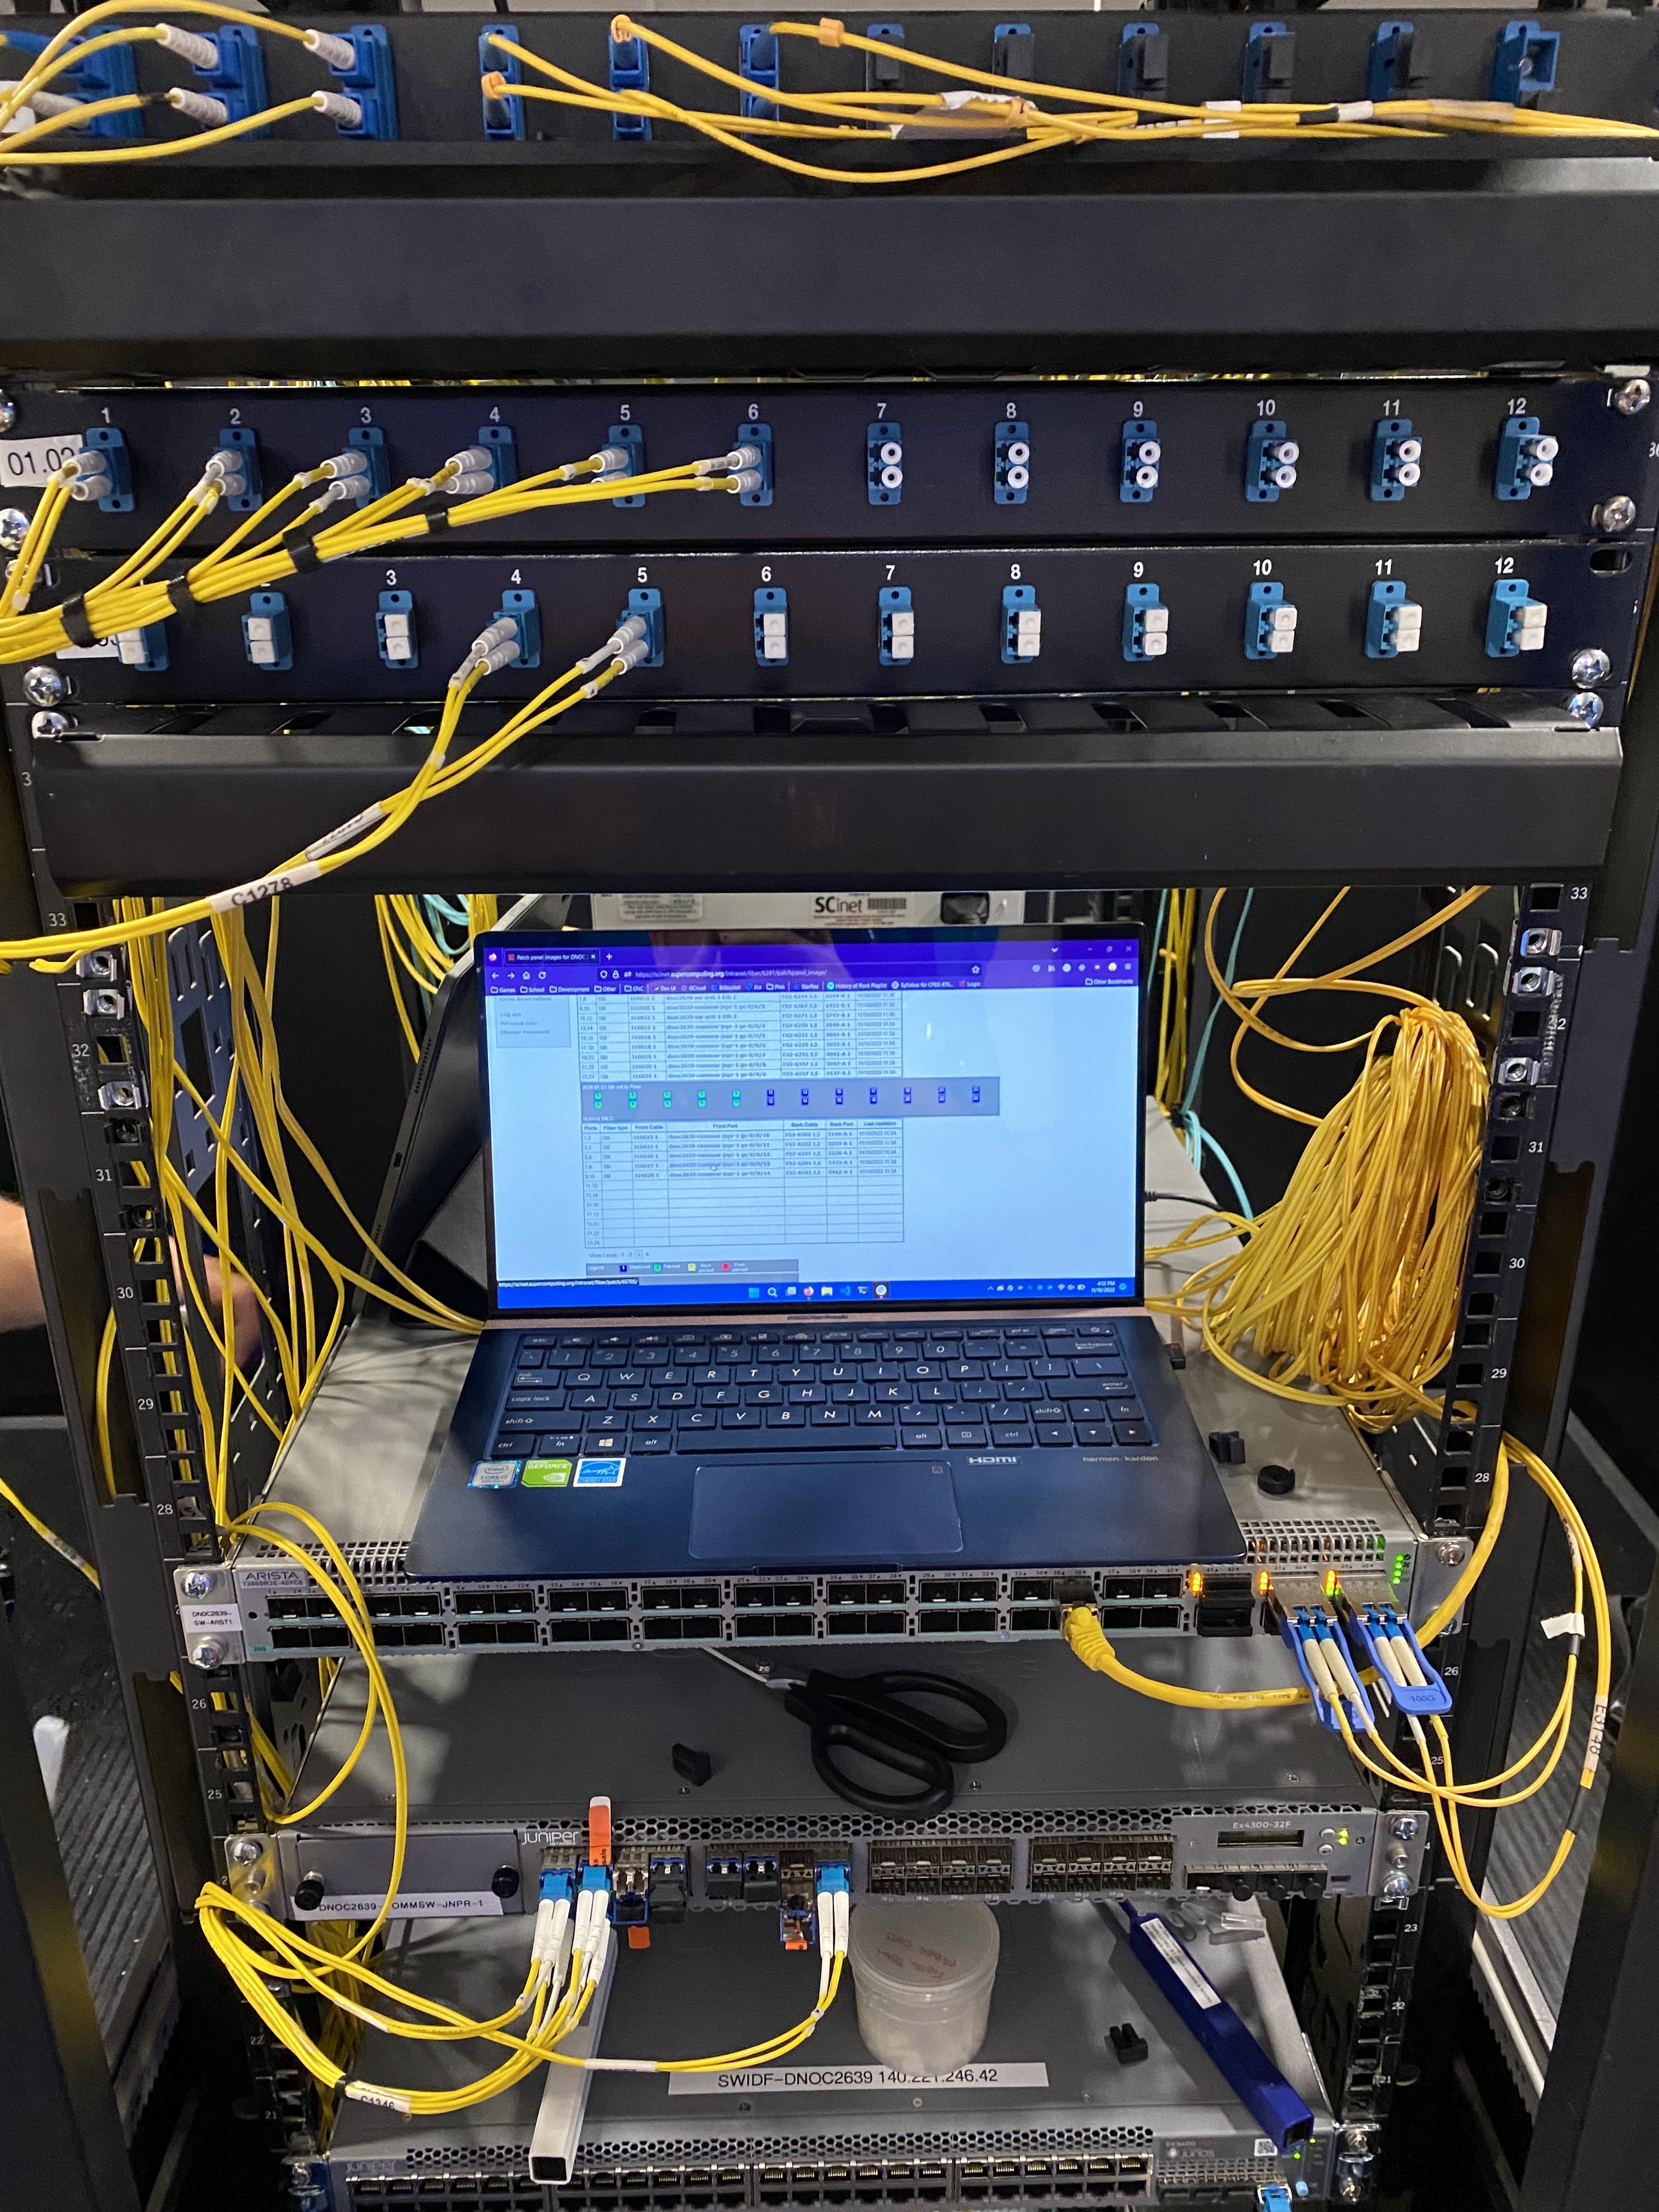 Cleaning and patching cabling for routing